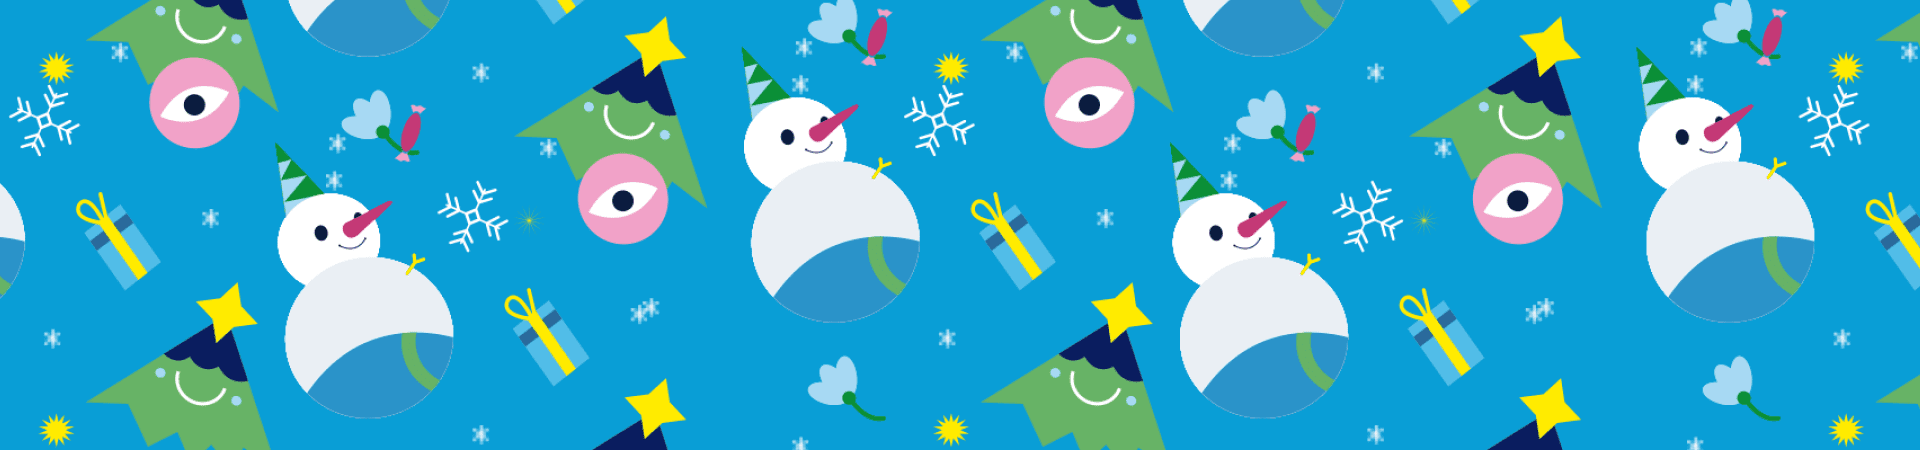 Christmas pattern on a blue background | Vectornator